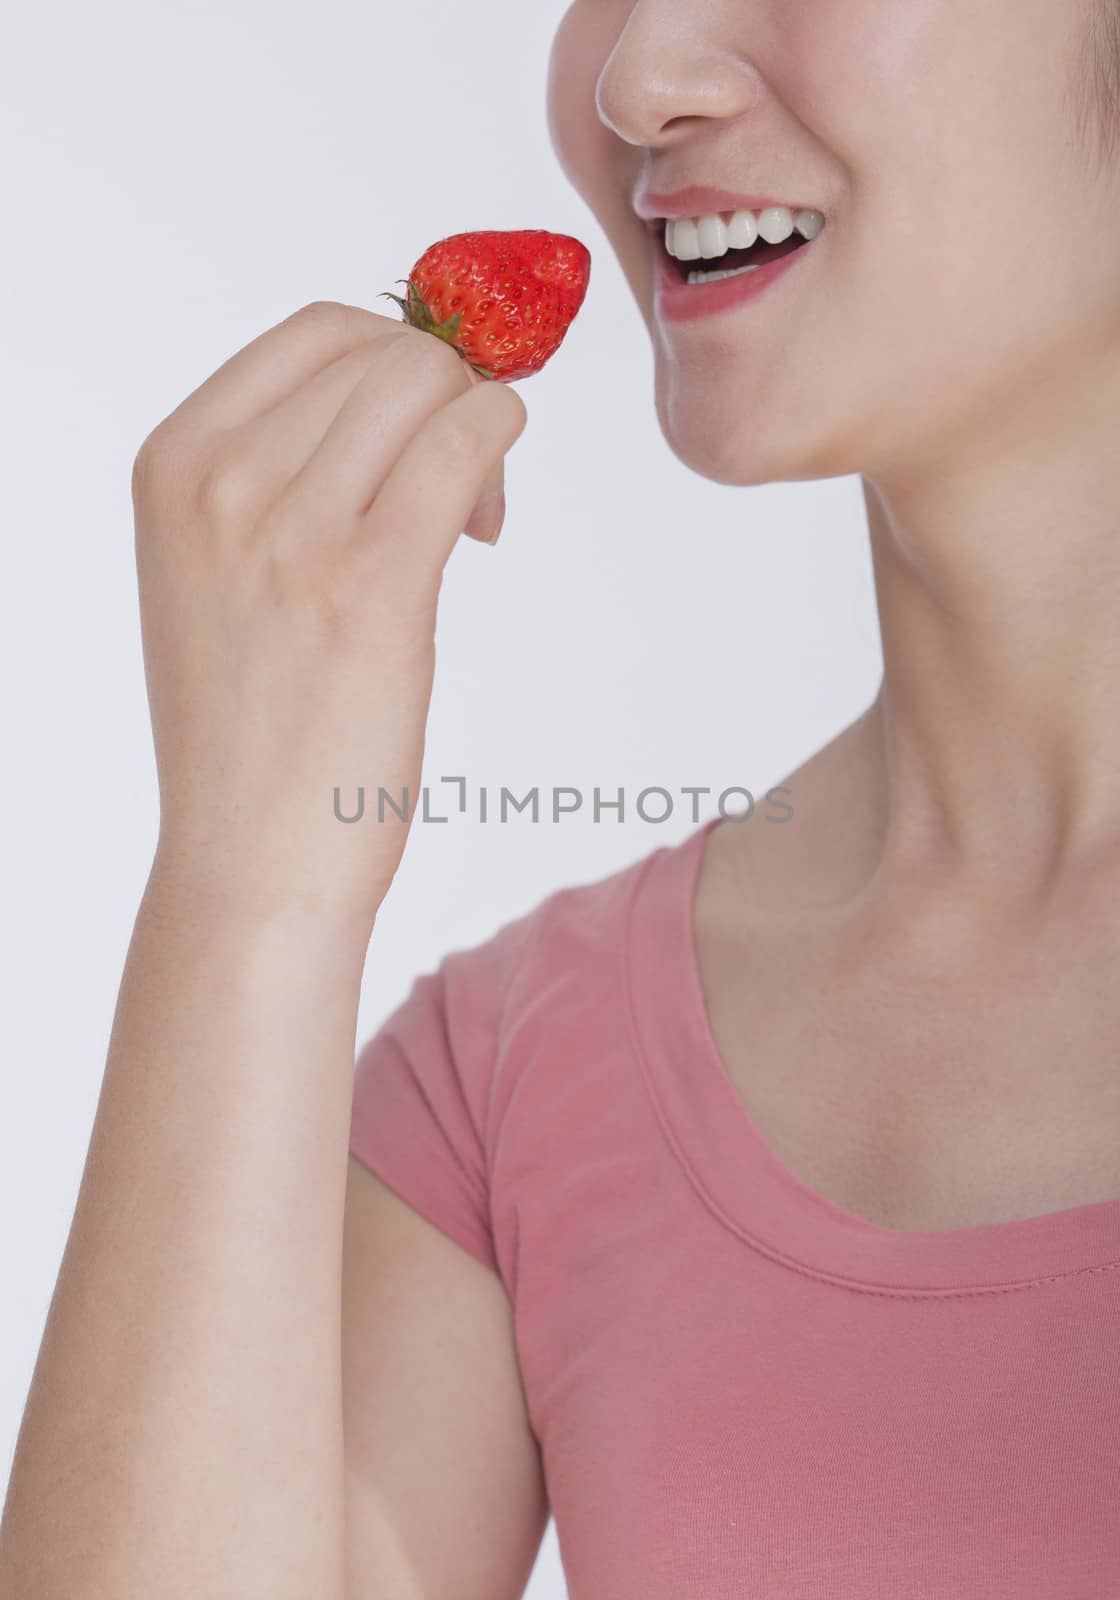 Young woman in pink shirt eating a strawberry, studio shot, half face showing